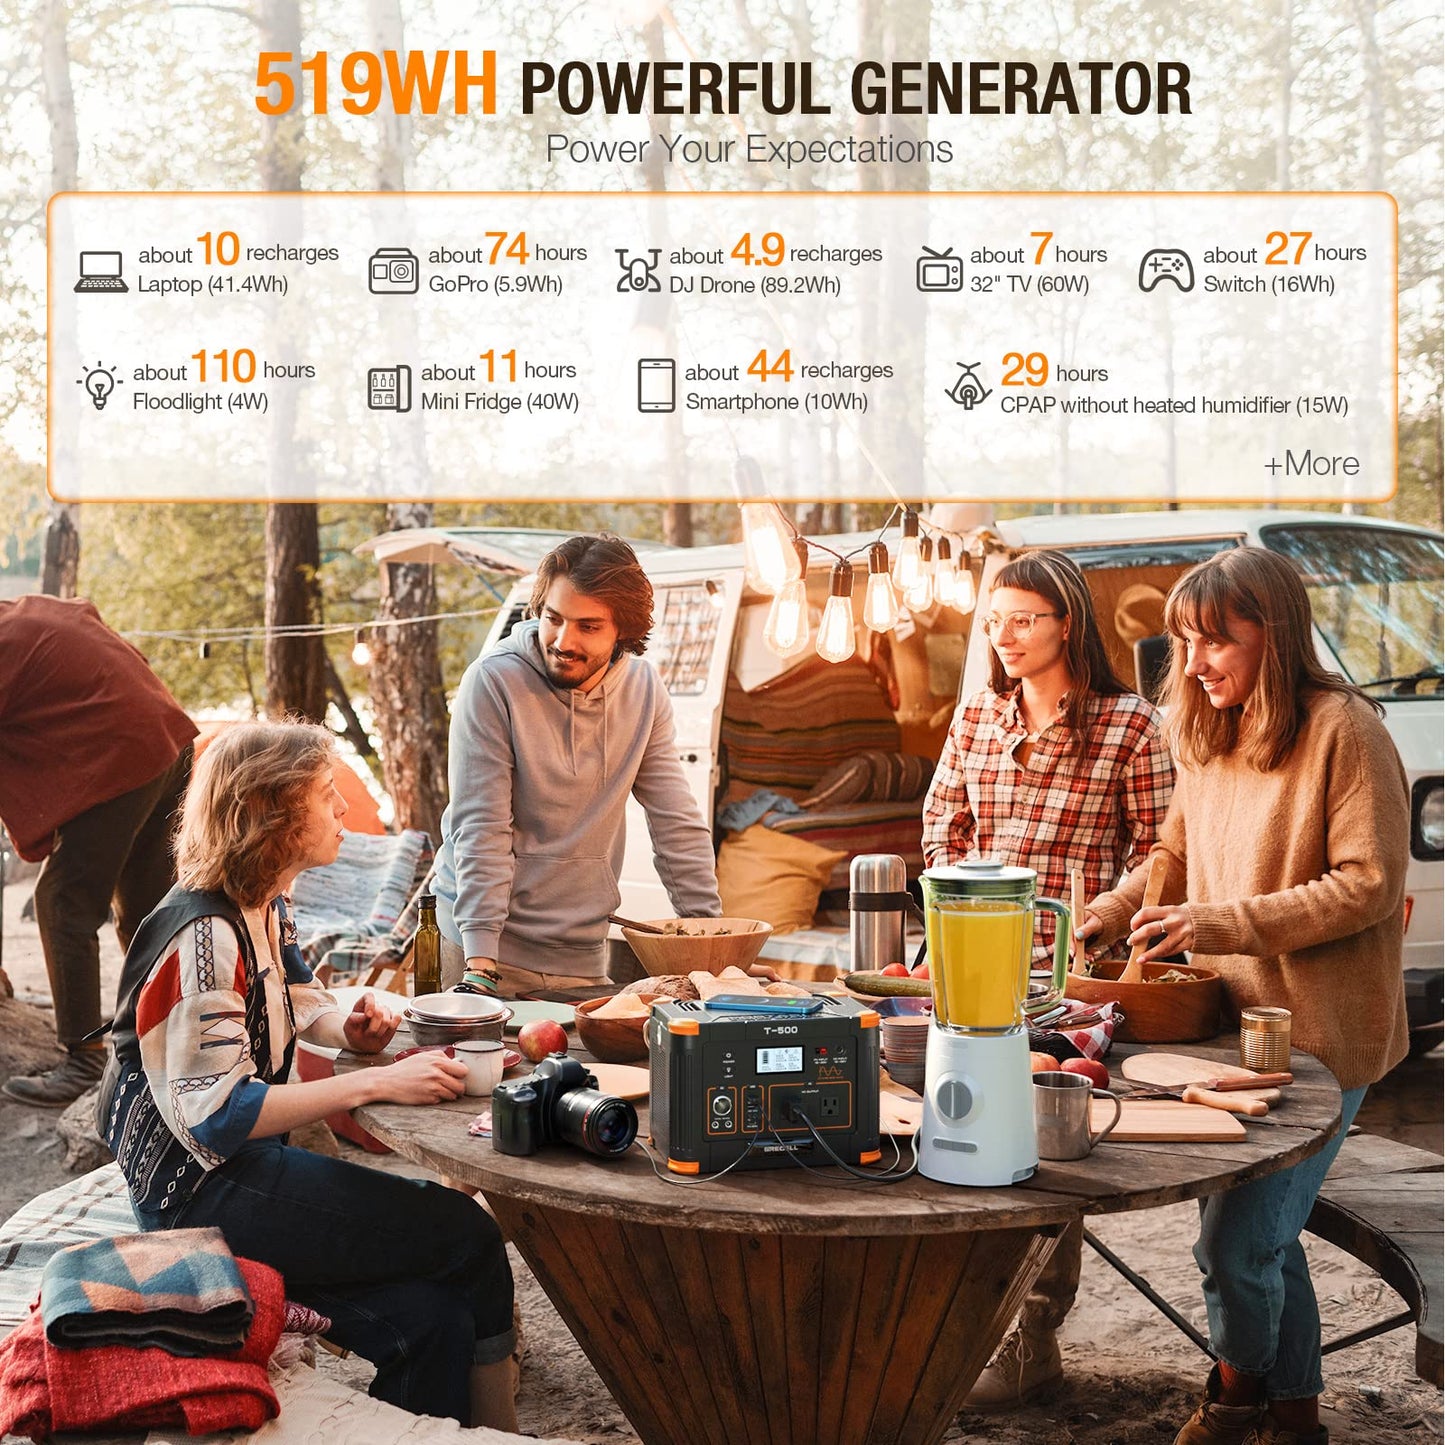 GRECELL T-500 Portable Power Station 500W, 519Wh/140400mAh Solar Generator